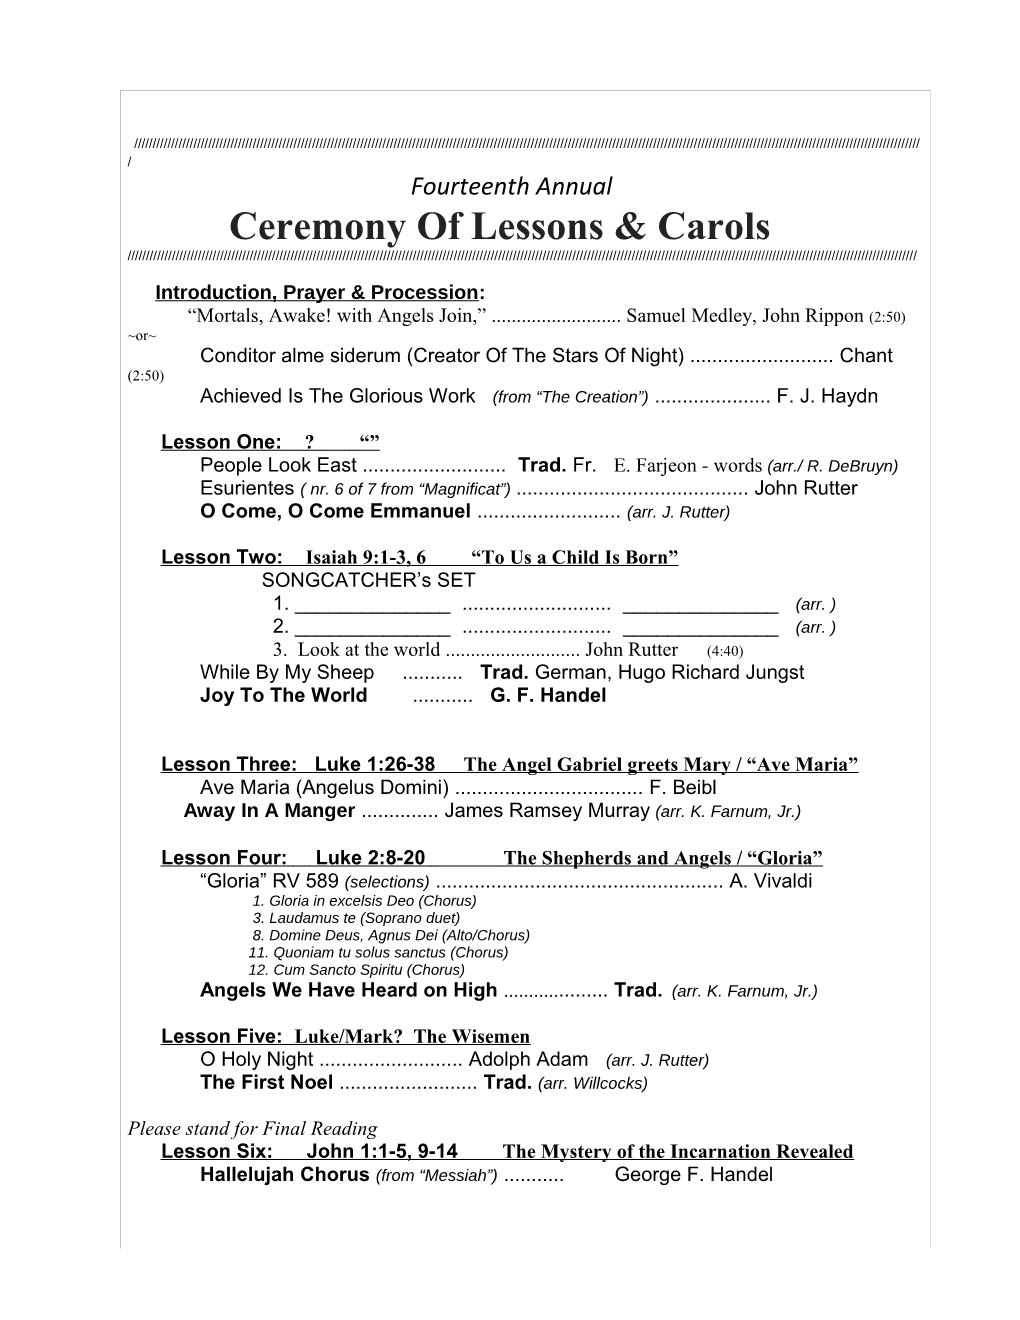 Fourteenth Annual Ceremony of Lessons & Carols